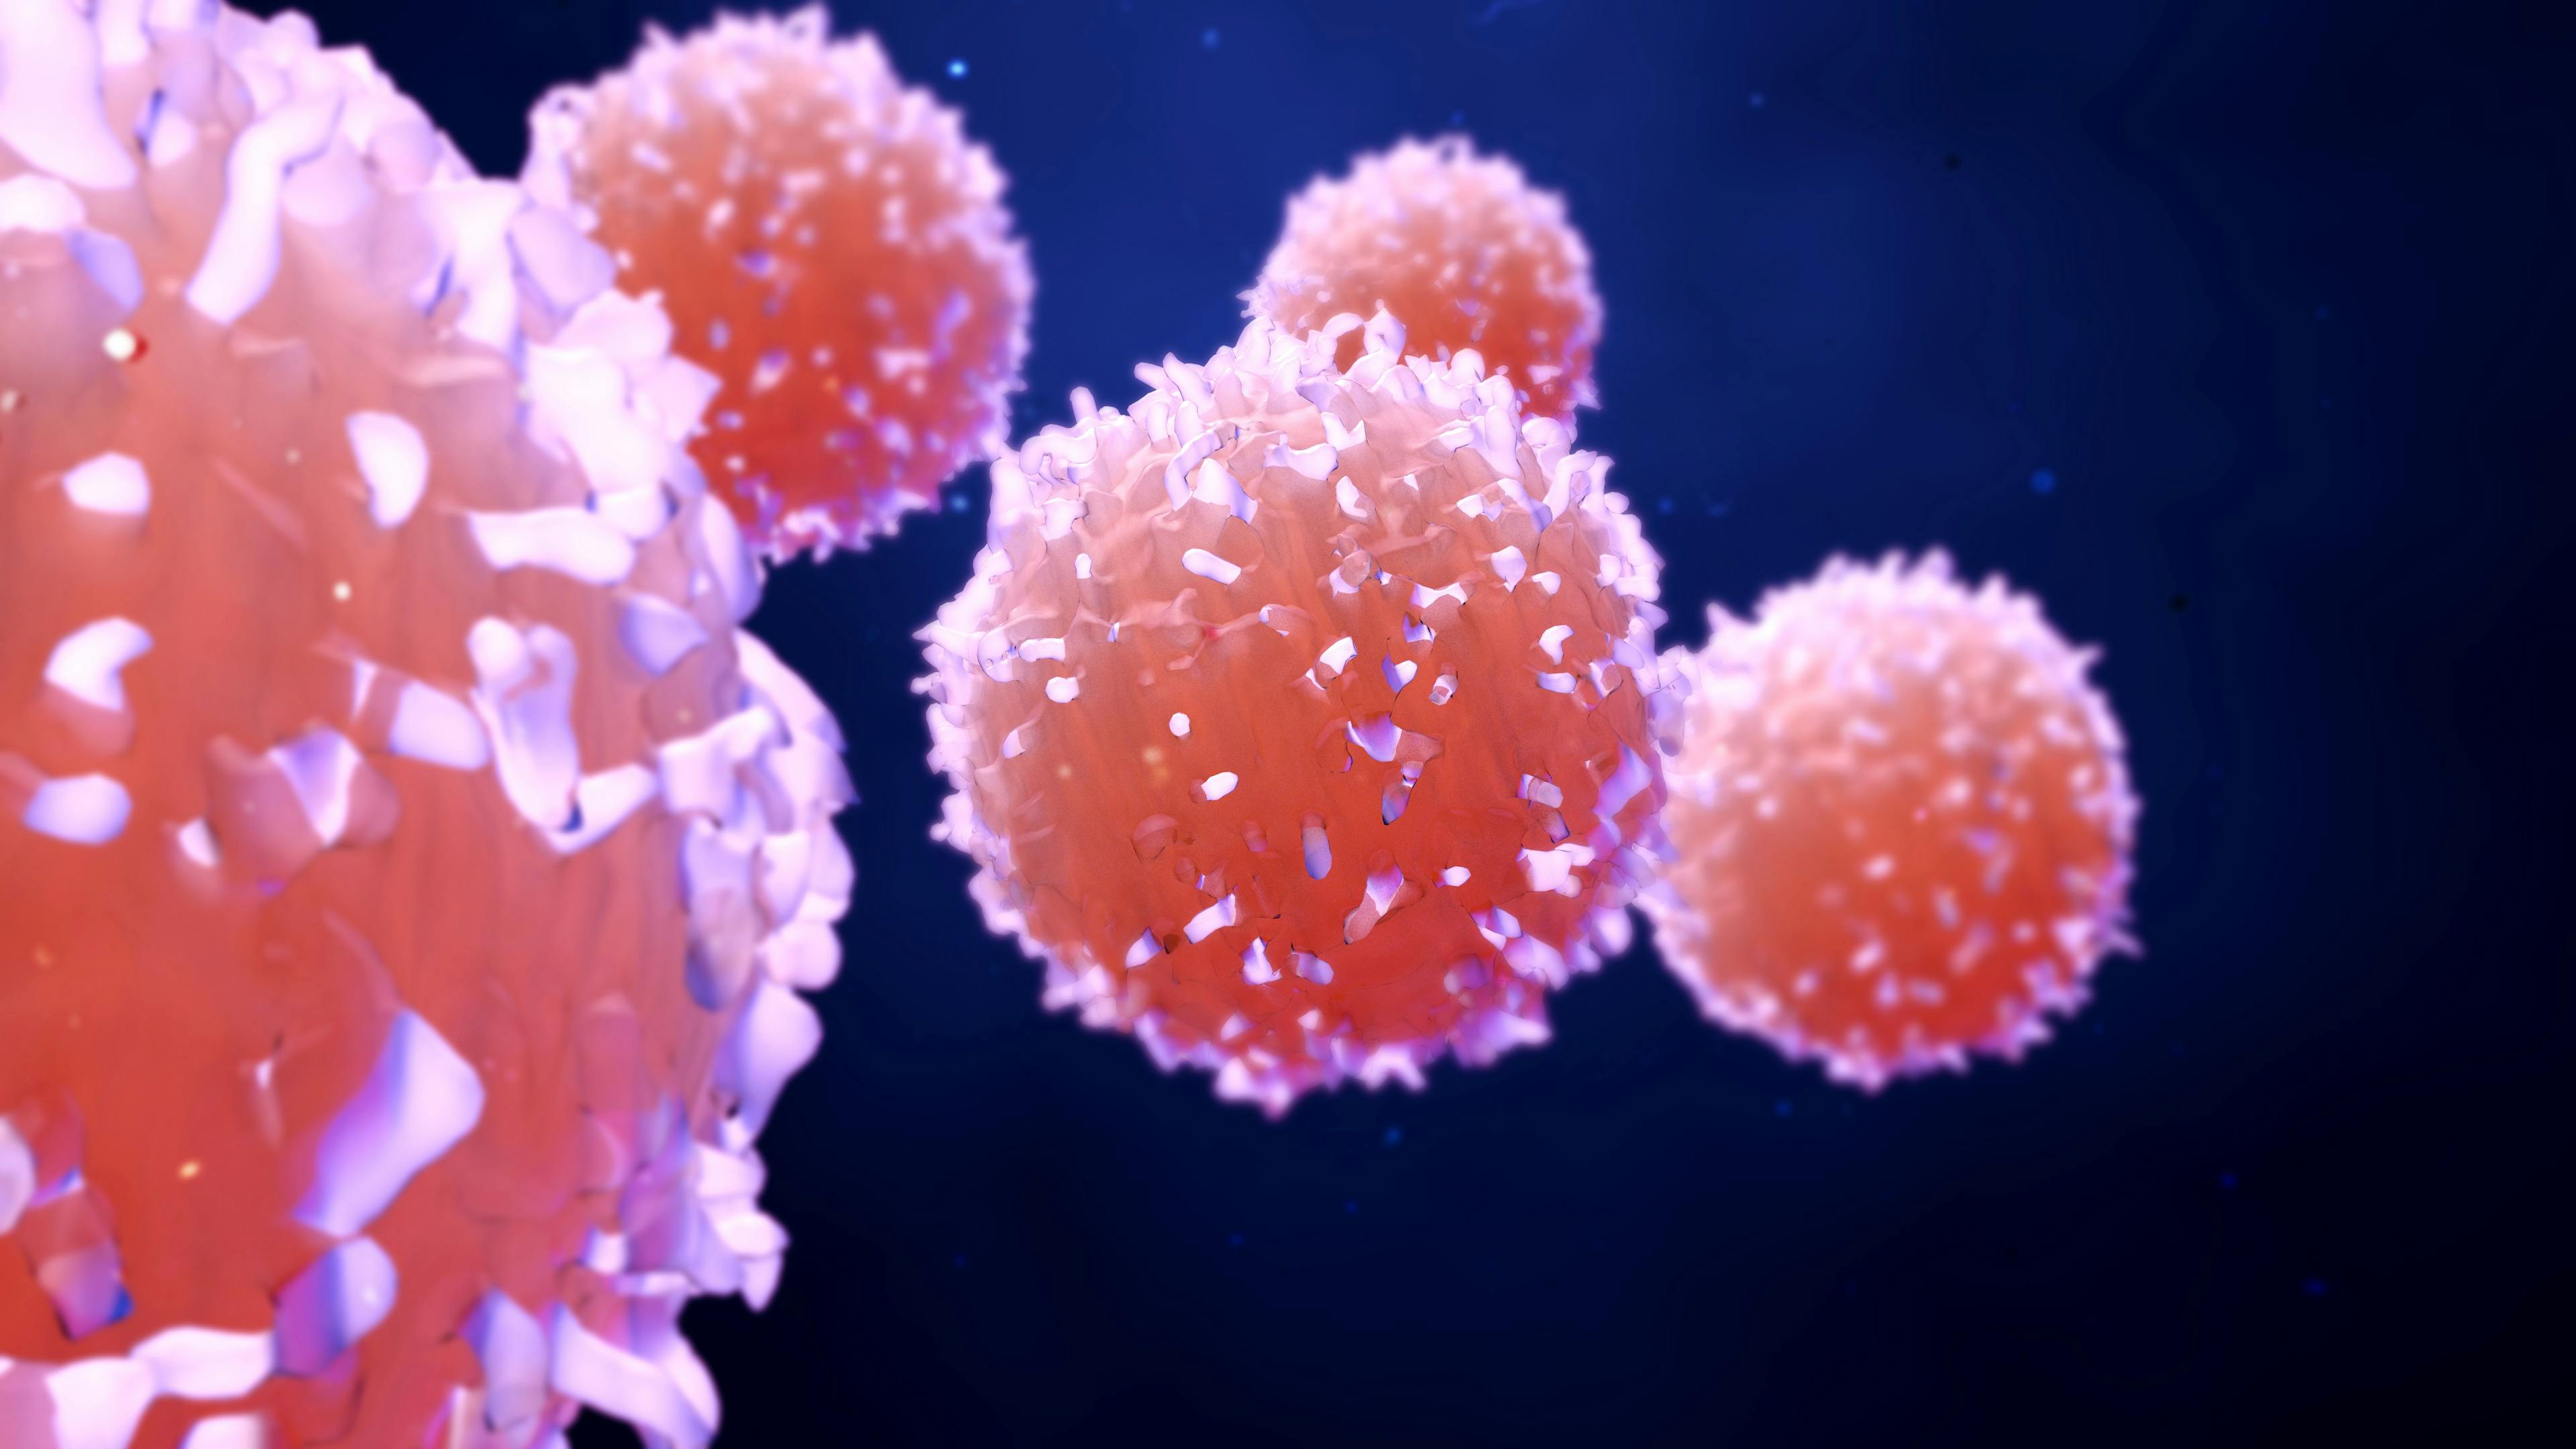 Synovial Sarcoma Sees Impressive Responses With T-Cell Therapy Afamitresgene Autoleucel